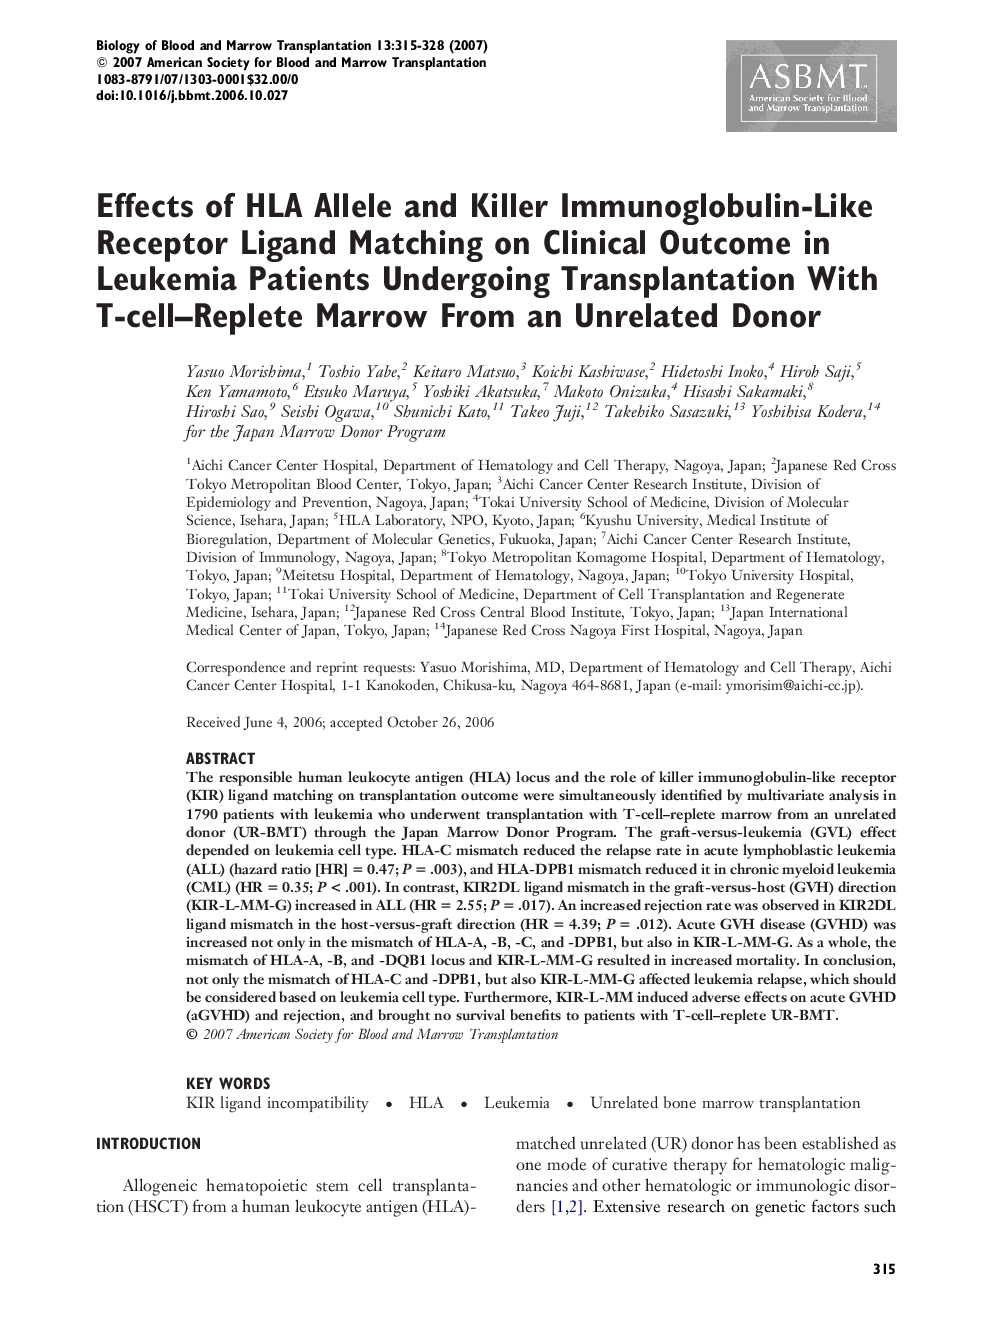 Effects of HLA Allele and Killer Immunoglobulin-Like Receptor Ligand Matching on Clinical Outcome in Leukemia Patients Undergoing Transplantation With T-cell–Replete Marrow From an Unrelated Donor